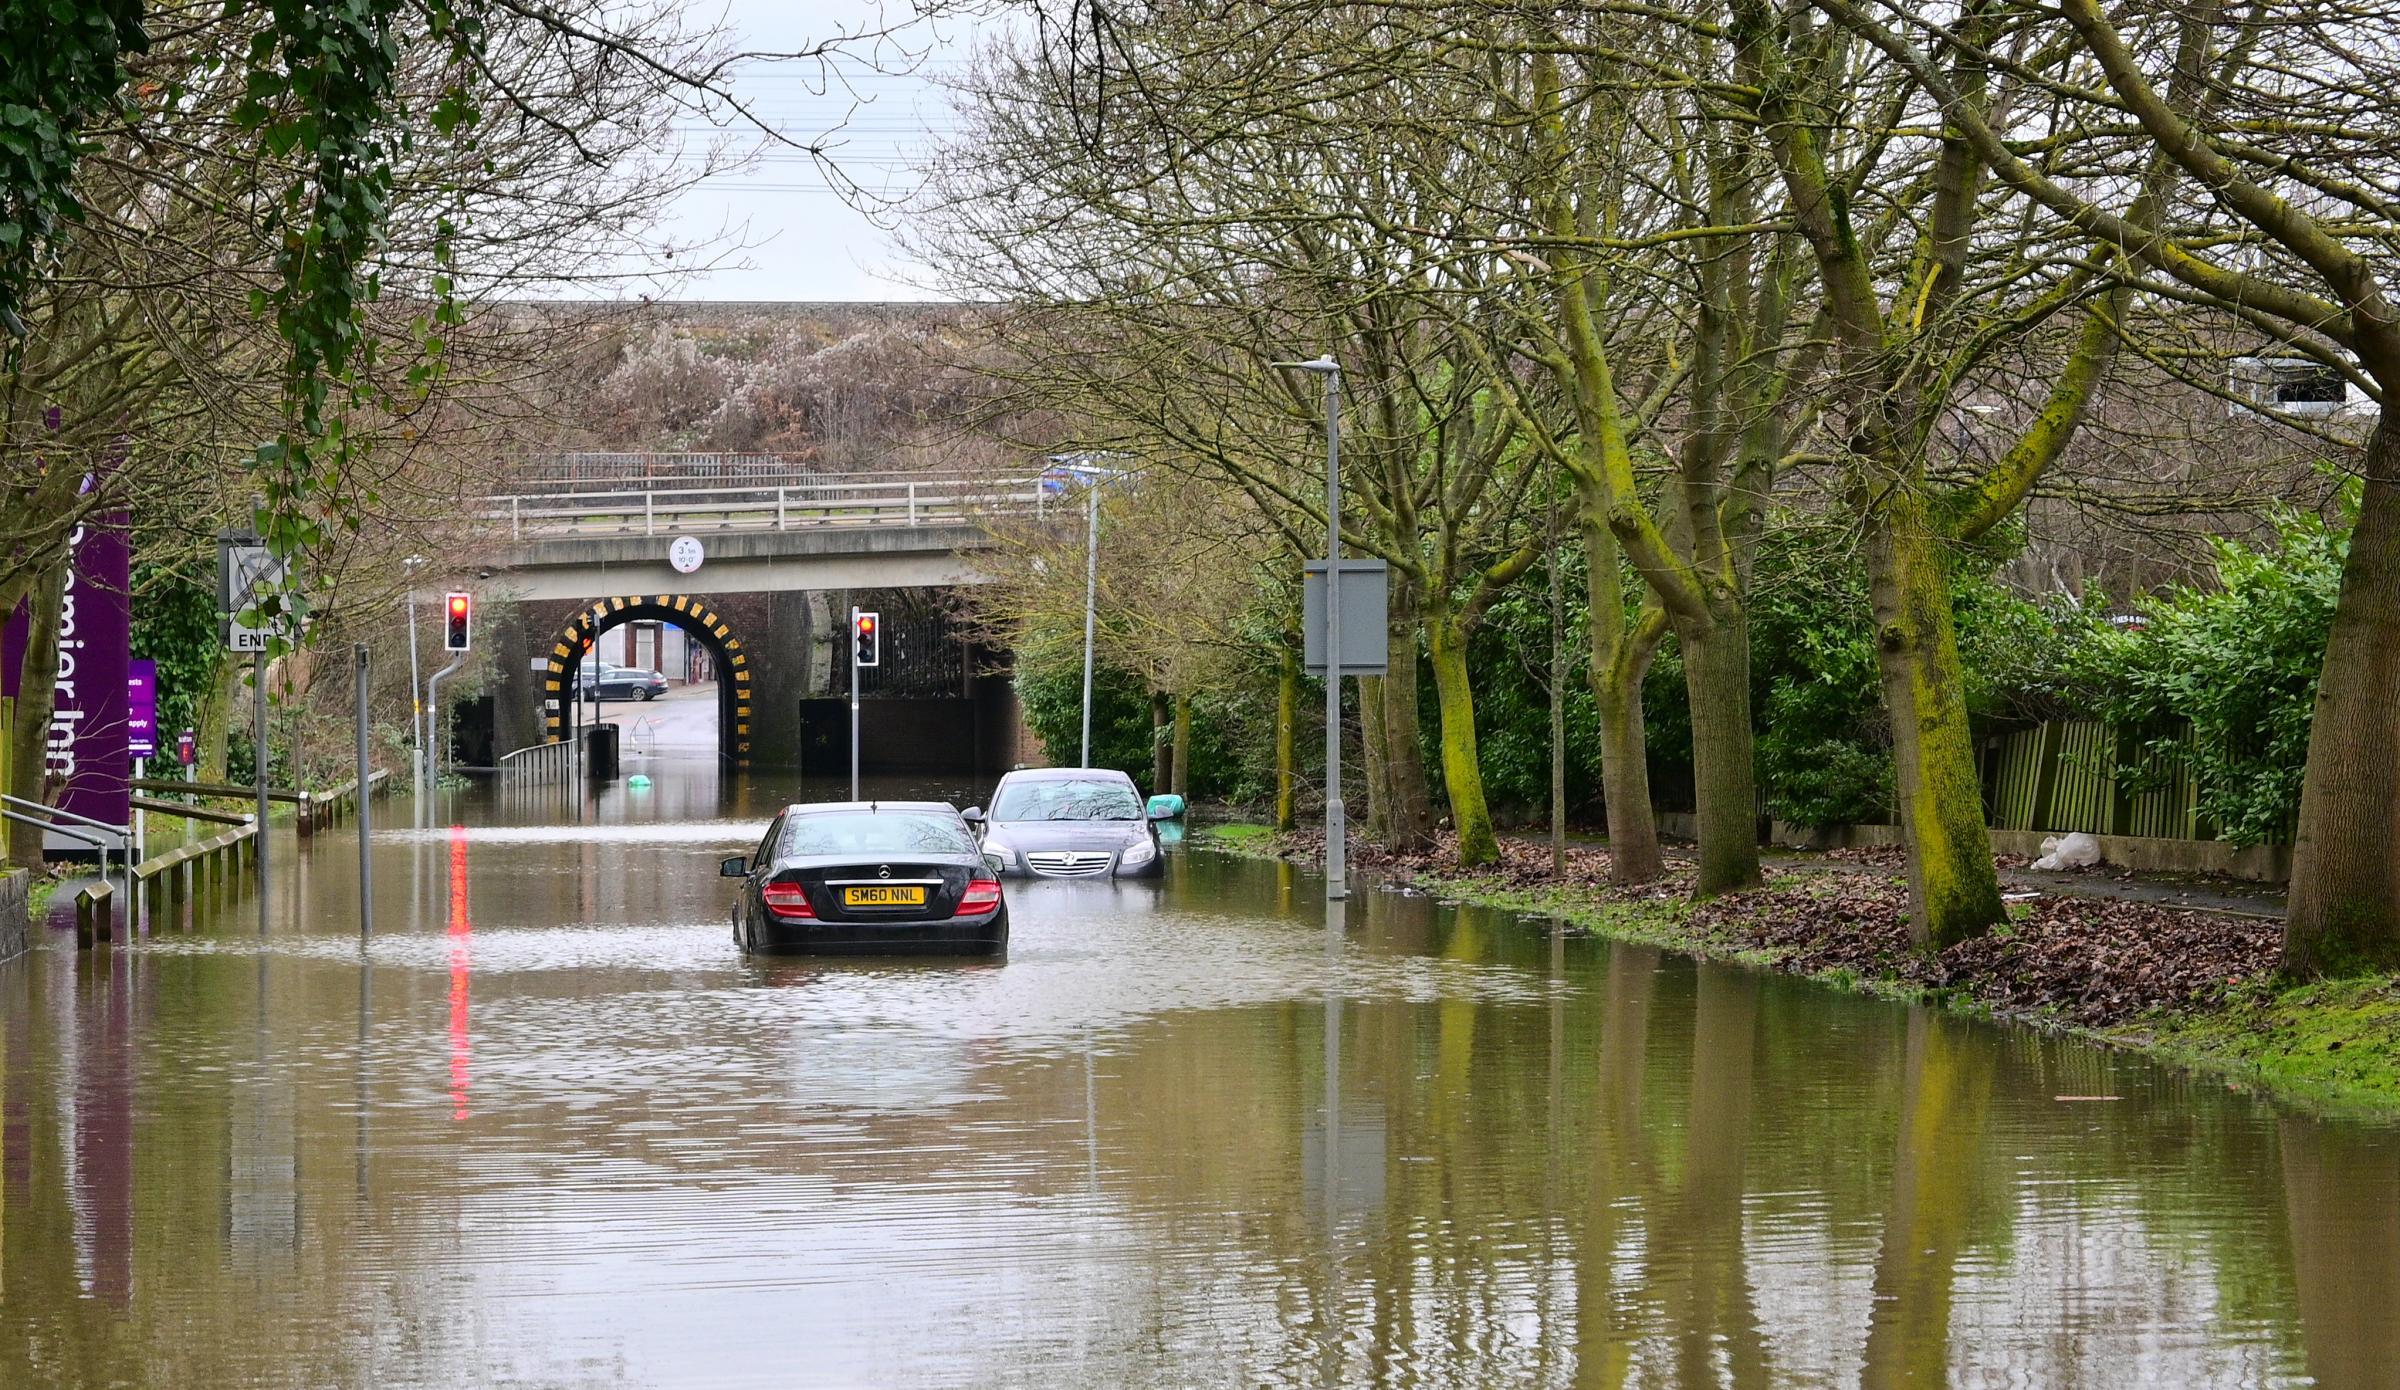 Images show flooding in Water Lane, Watford. Photos: Rory Robinson